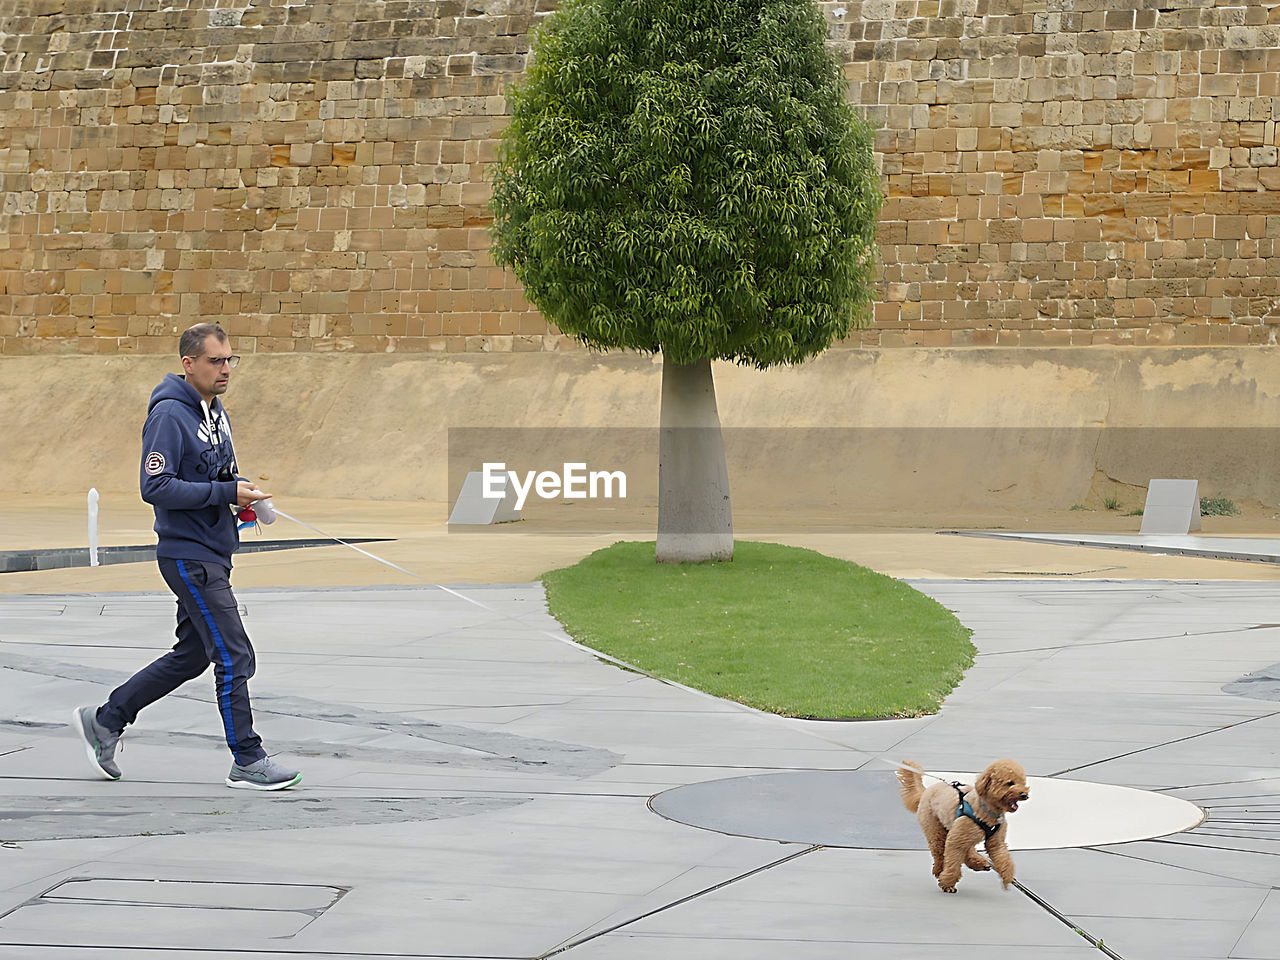 dog, full length, men, one person, adult, architecture, plant, day, tree, one animal, lifestyles, nature, wall, canine, leisure activity, footpath, casual clothing, built structure, walking, city, person, street, pet, road, side view, outdoors, domestic animals, sports, motion, building exterior